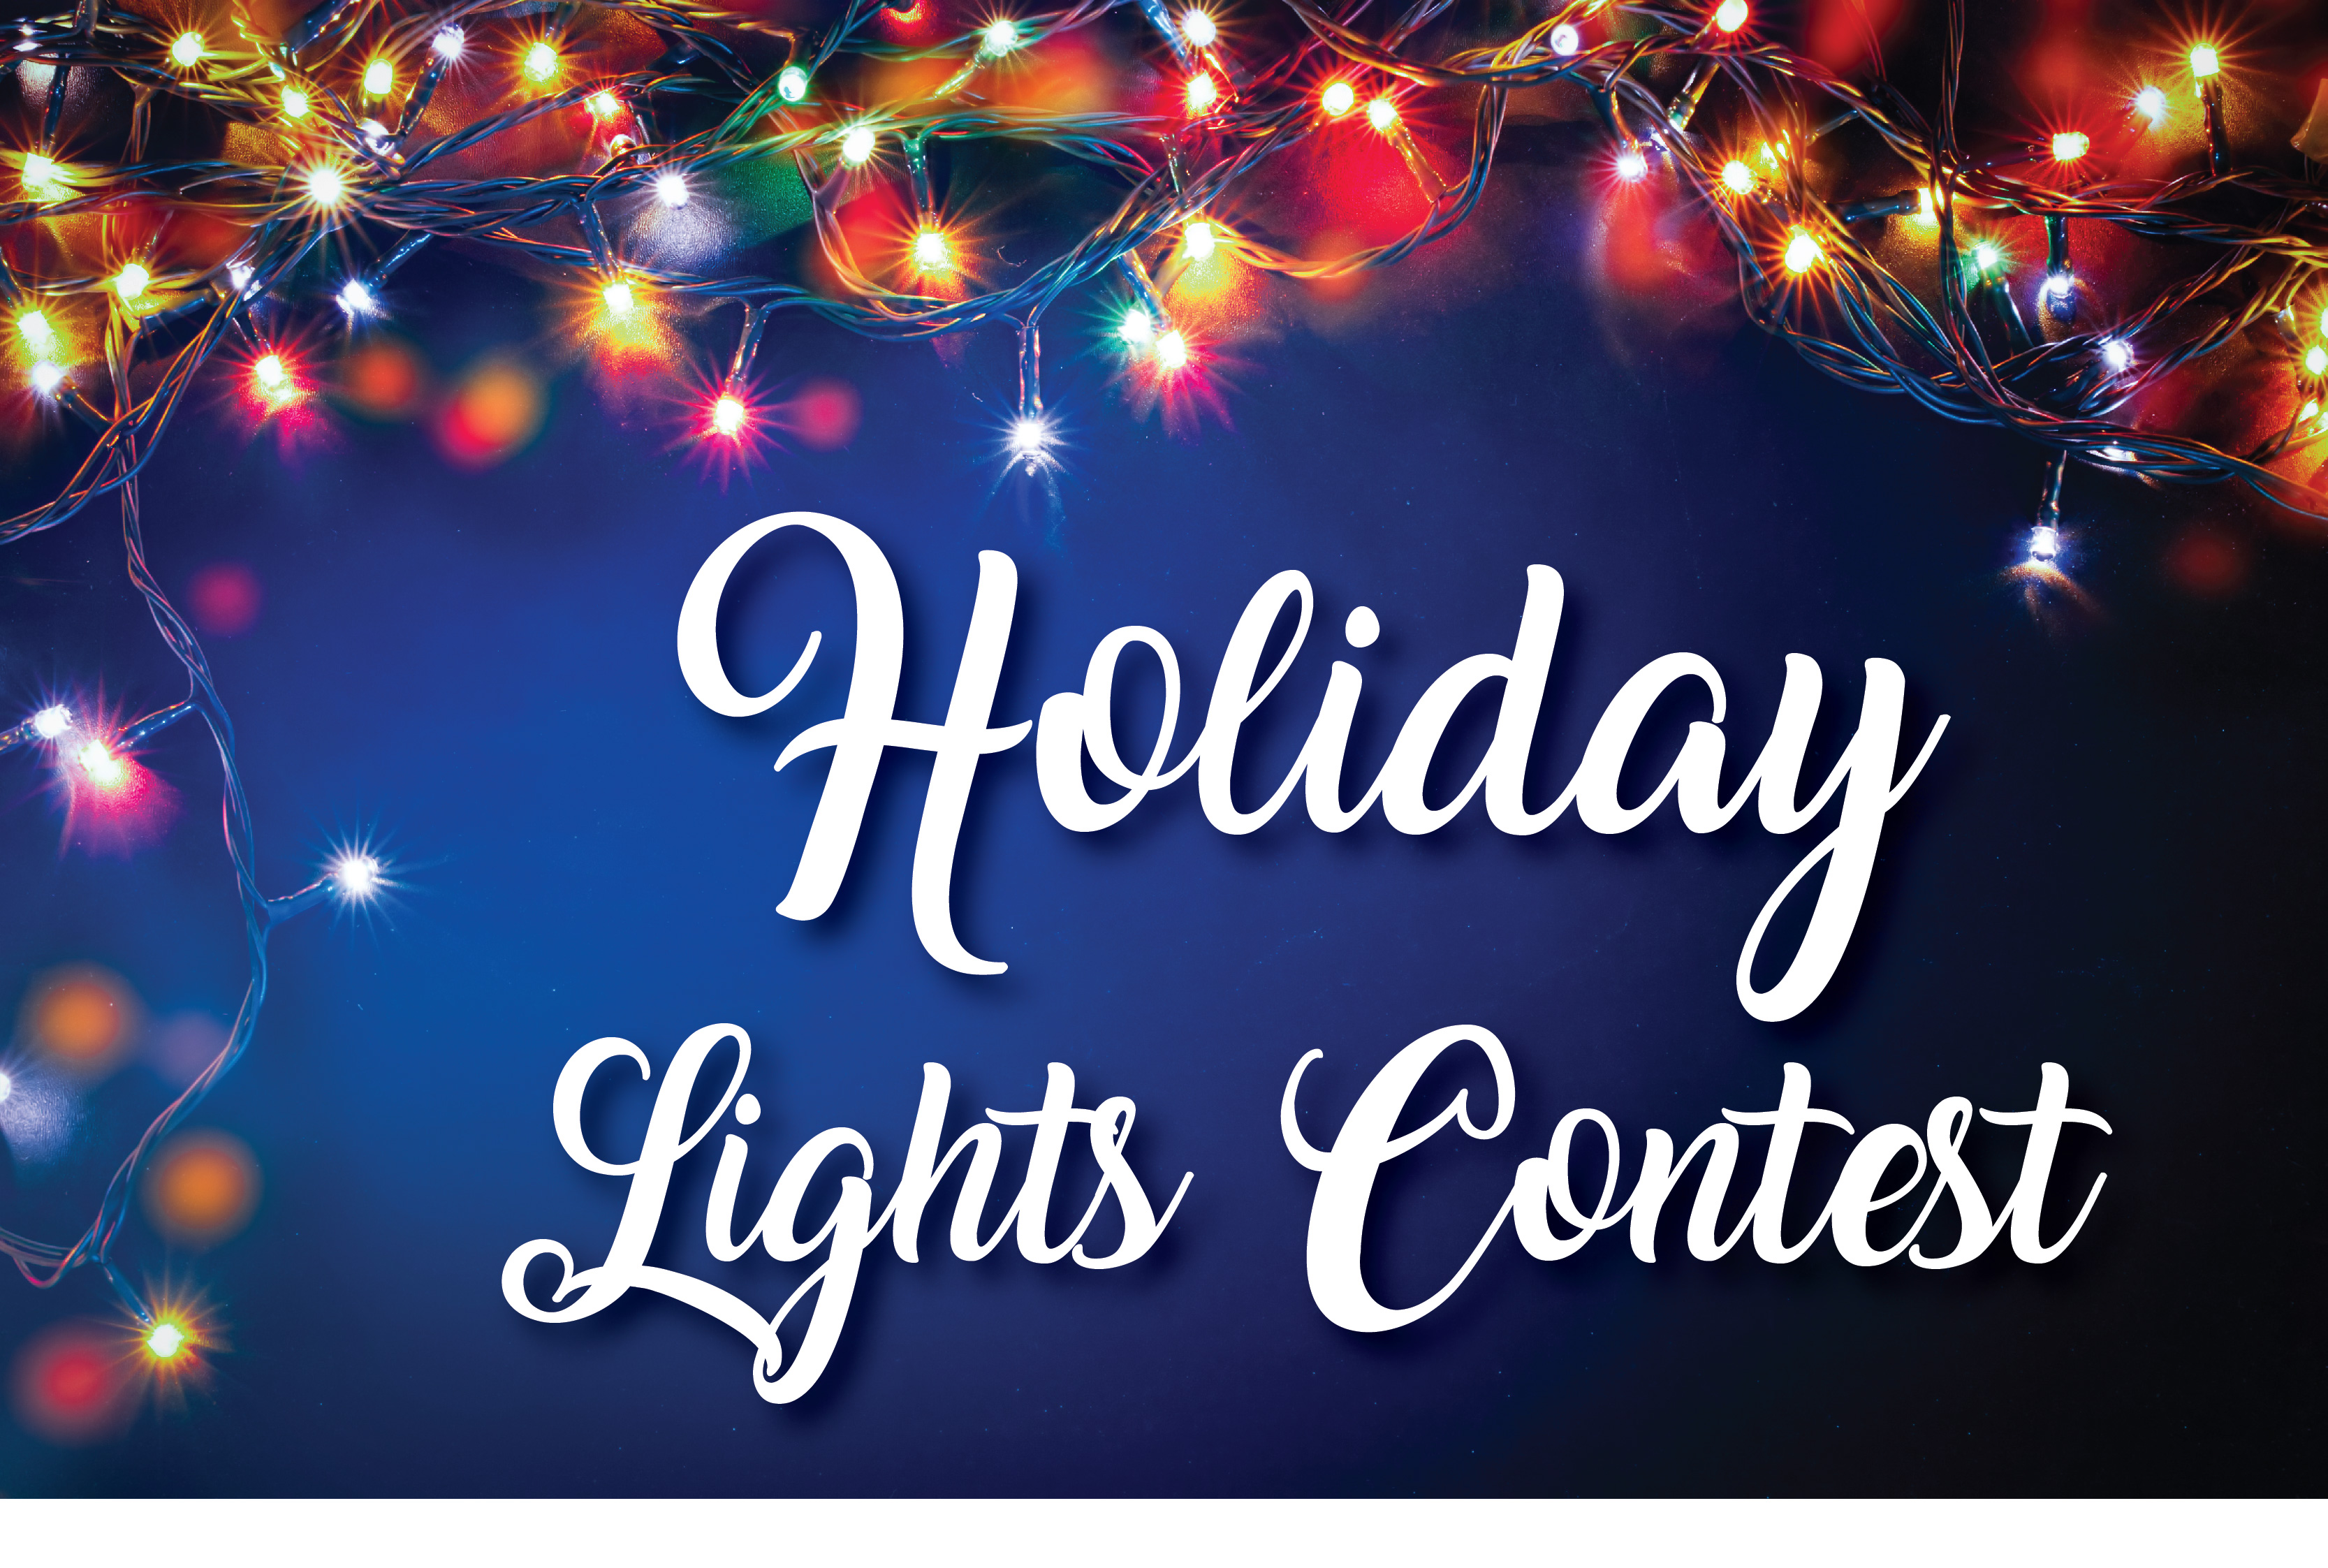 Grand Lakes Holiday Lighting Contest